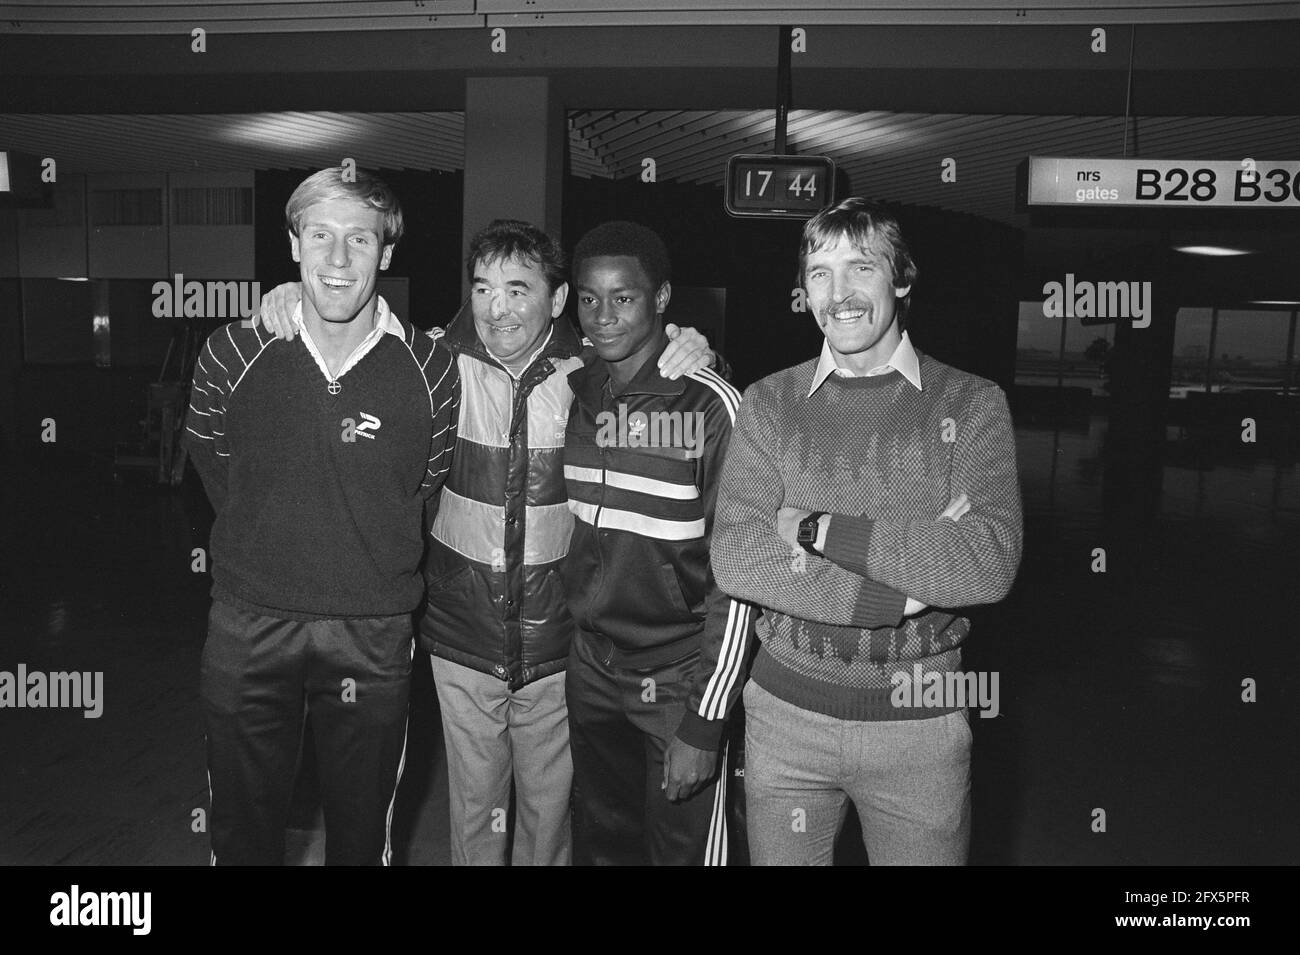 Arrival of Nottingham Forest at Schiphol Airport; from left to right goalkeeper Van Breukelen, manager Brian Clough and players Fairclough and Thijssen, 17 October 1983, arrivals and departures, managers, soccer, footballers, The Netherlands, 20th century press agency photo, news to remember, documentary, historic photography 1945-1990, visual stories, human history of the Twentieth Century, capturing moments in time Stock Photo